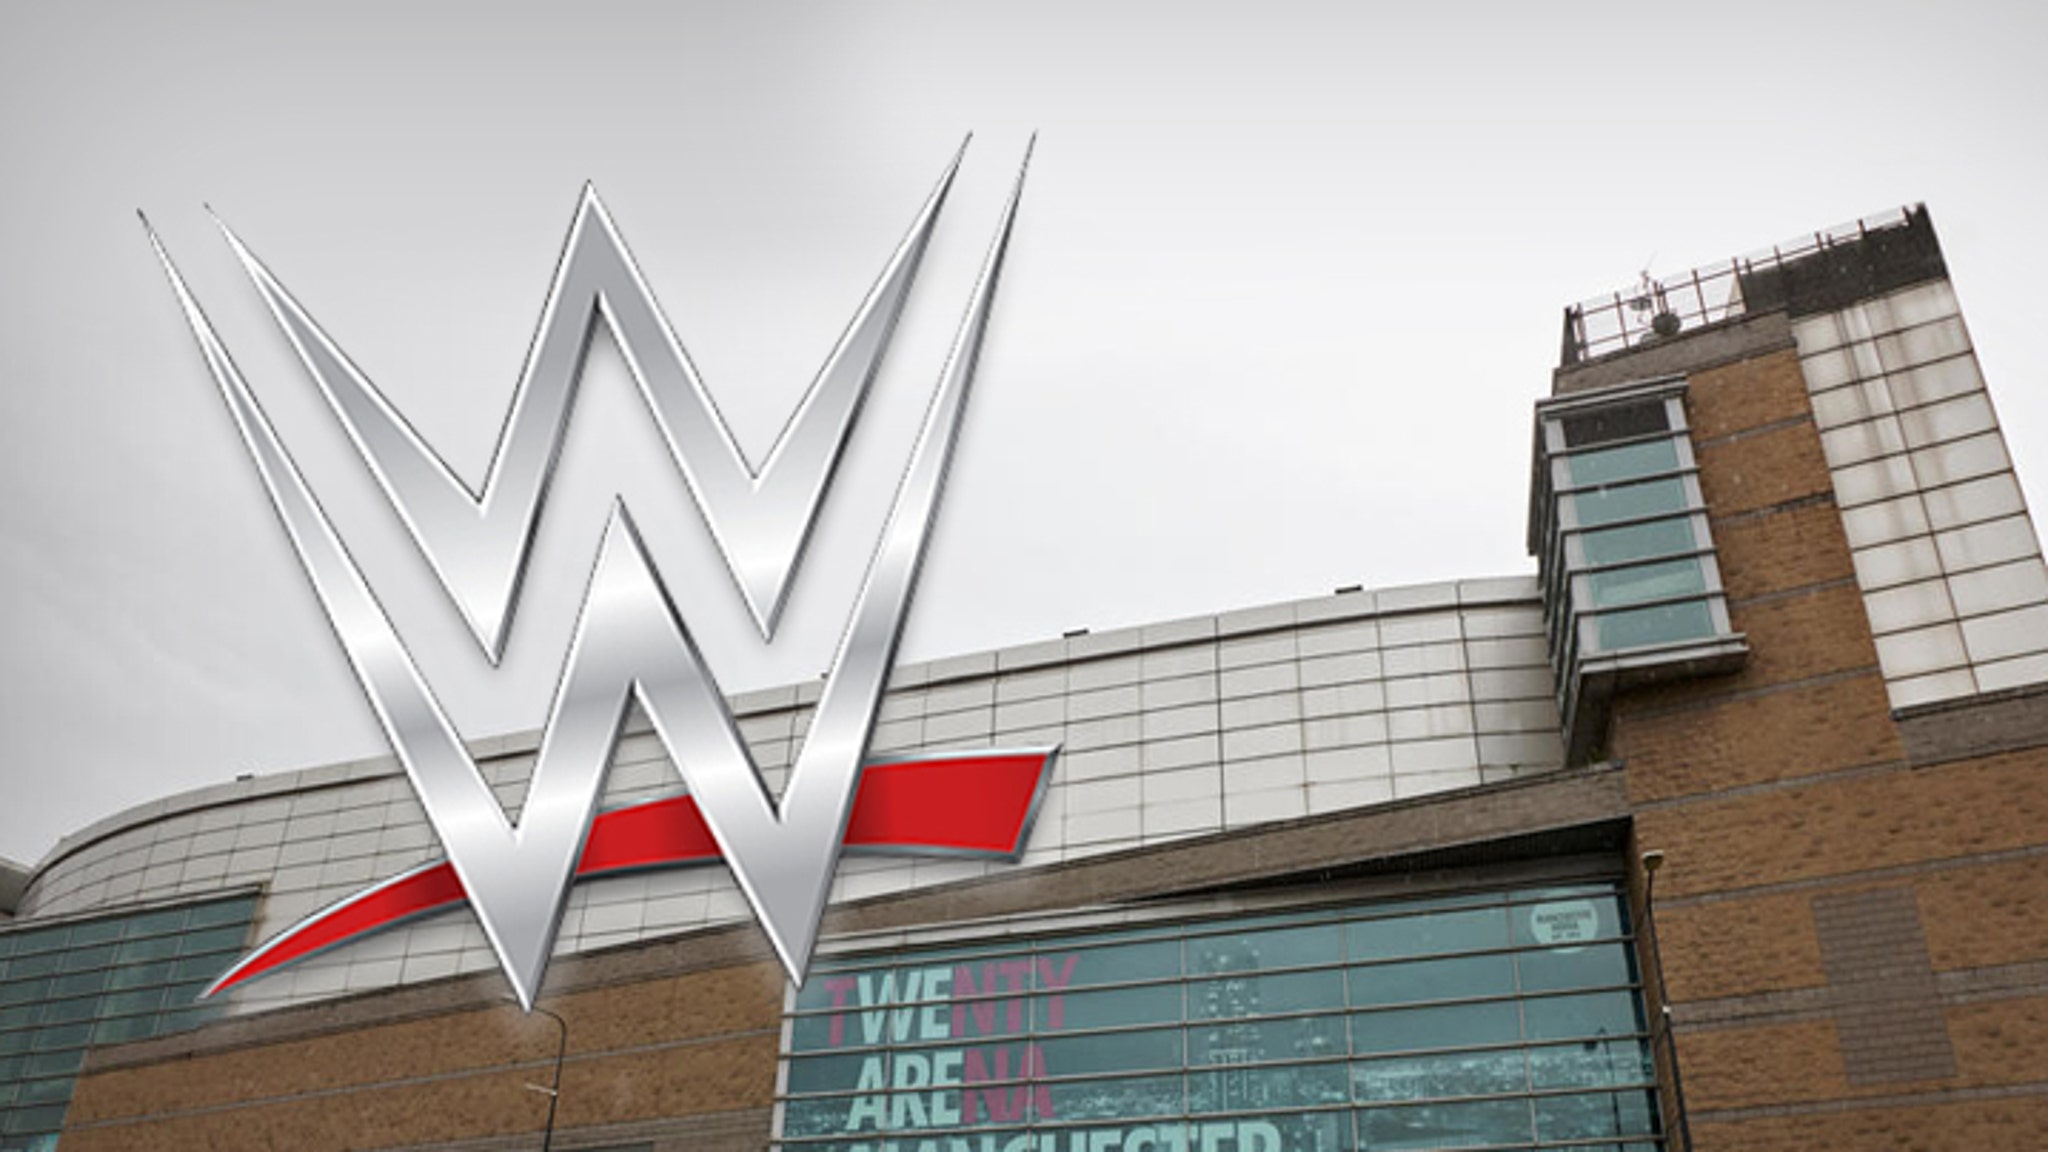 WWE Show At Manchester Arena In Limbo After Attack